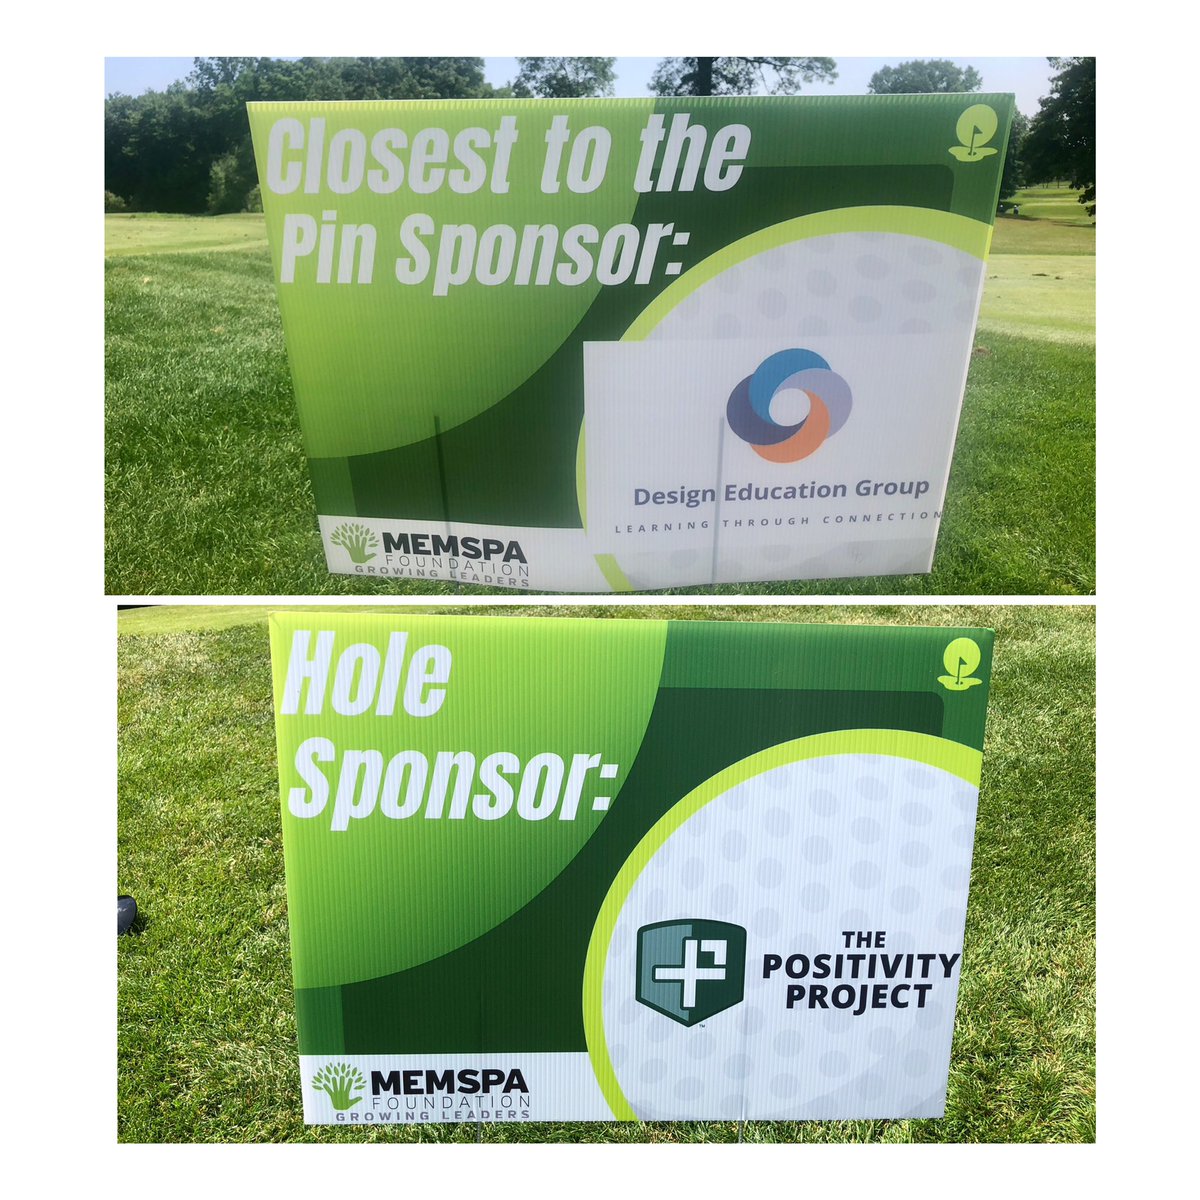 Had a wonderful time supporting the @MEMSPA Foundation with some great leaders across the state today!  Thousands raised for kids and schools!  

Thank you to all our sponsors, especially @DesignEduGroup & @PosProject, and all the golfers! #miched #MEMSPAchat